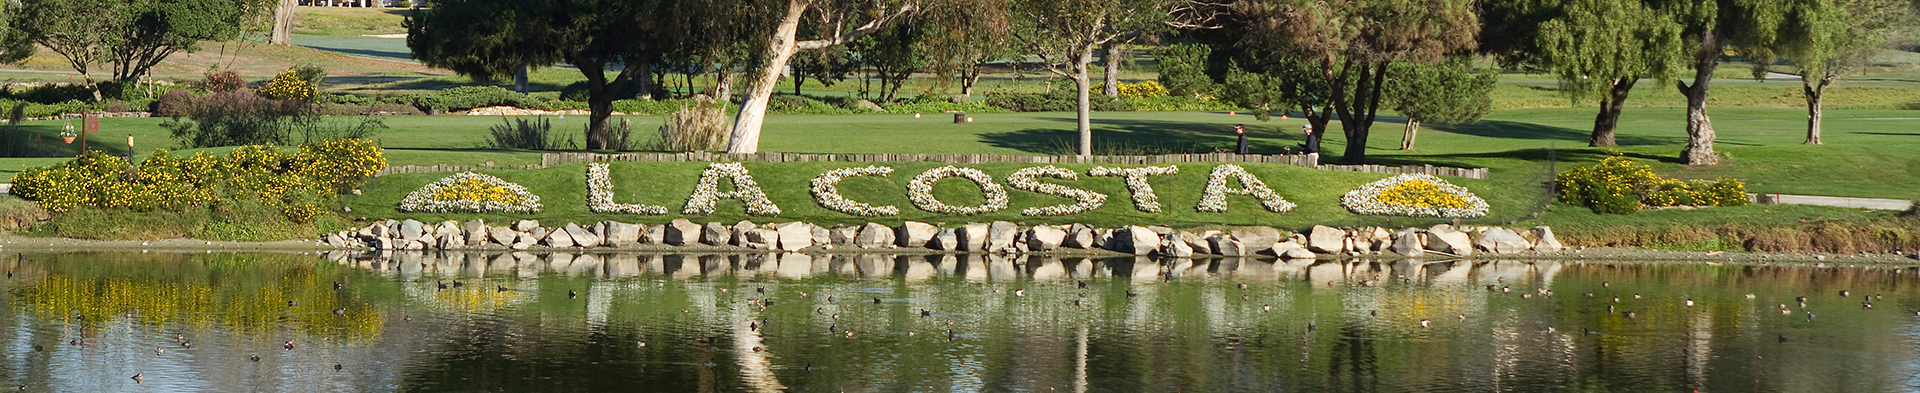 View of pond on La Costa golf course